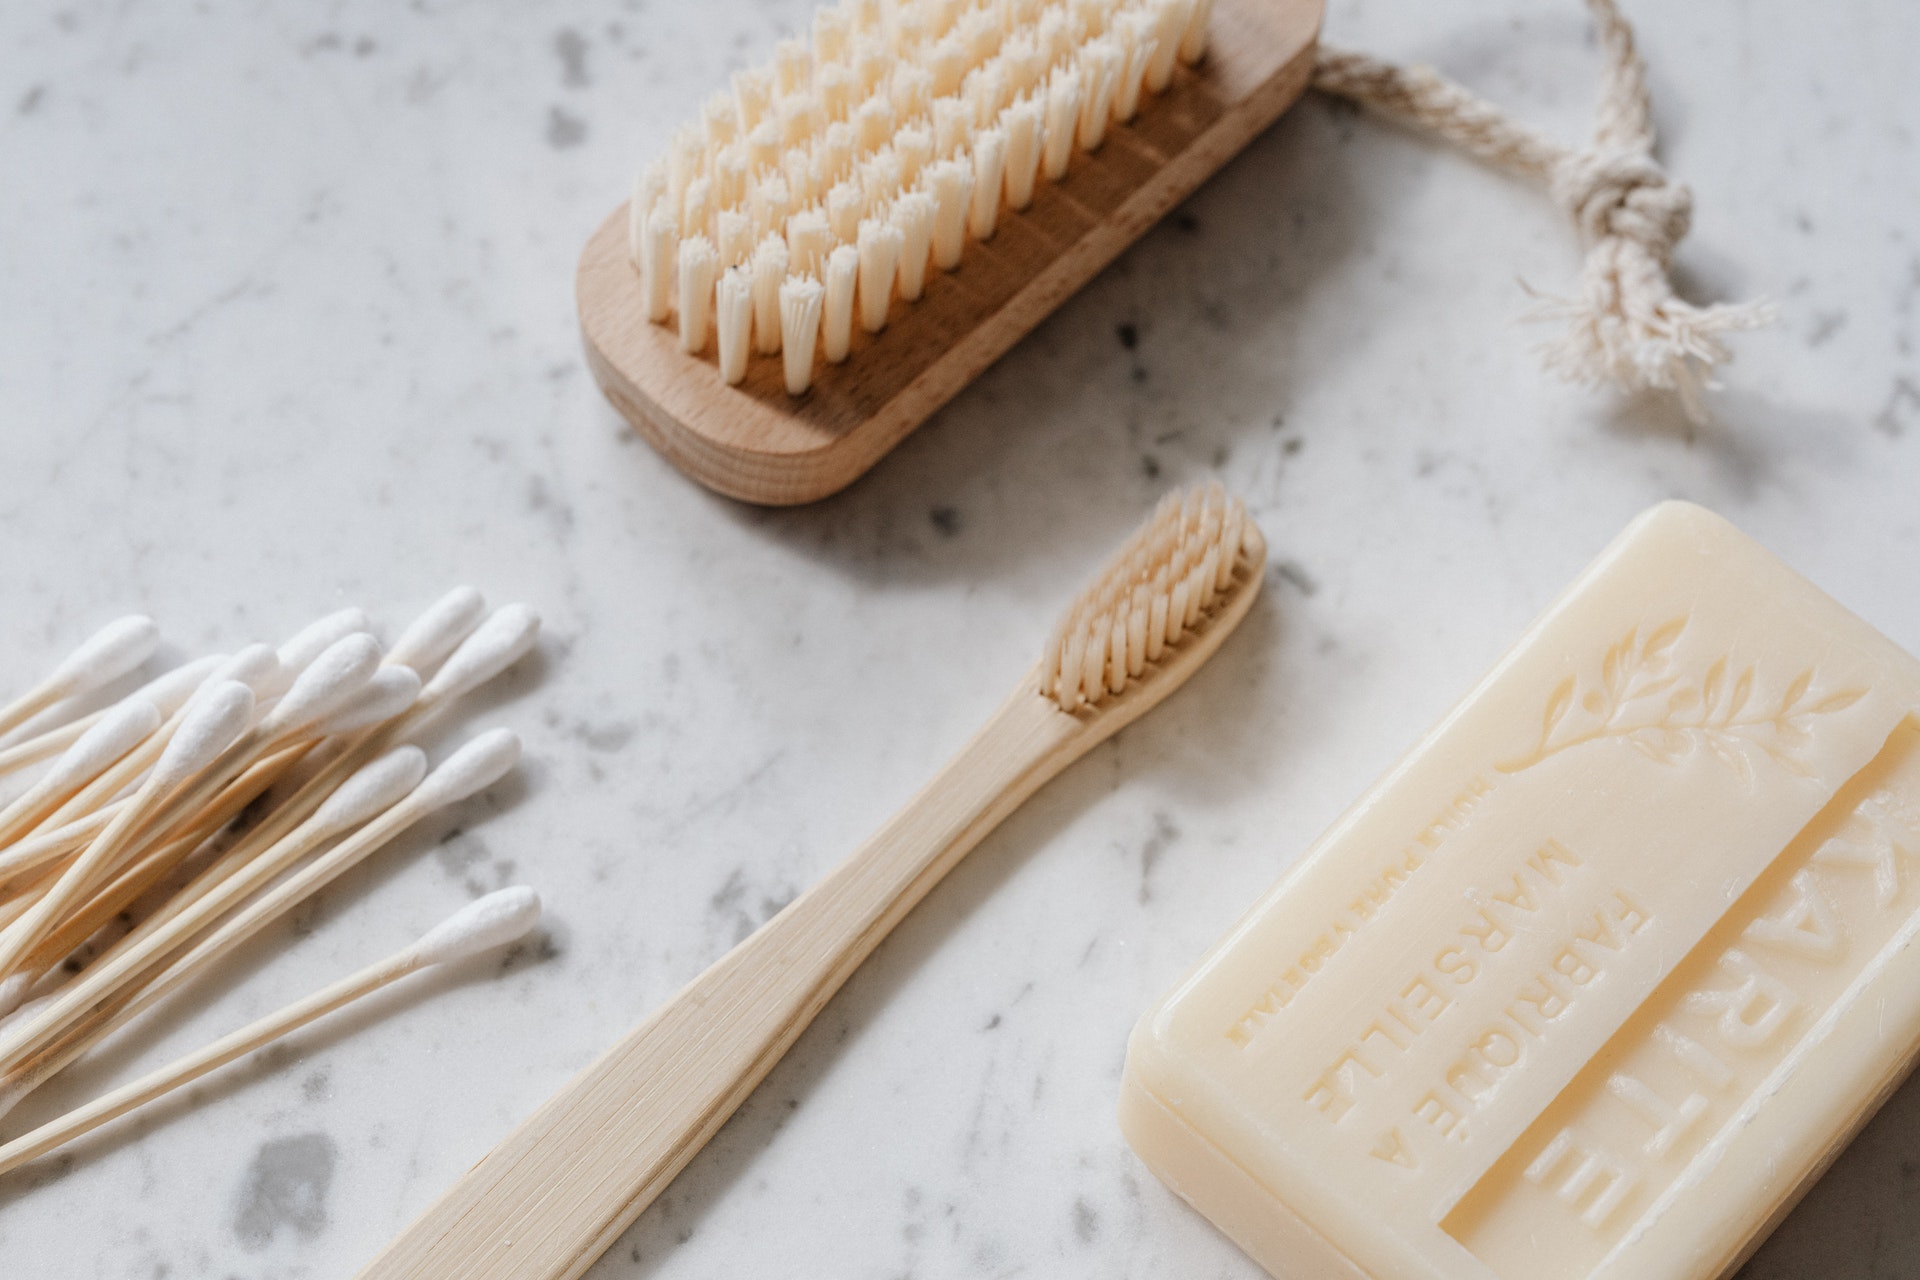 eco-friendly-bamboo-toiletries-lying-on-marble-surface-toothbrush-cotton-buds-and-bar-of-soap